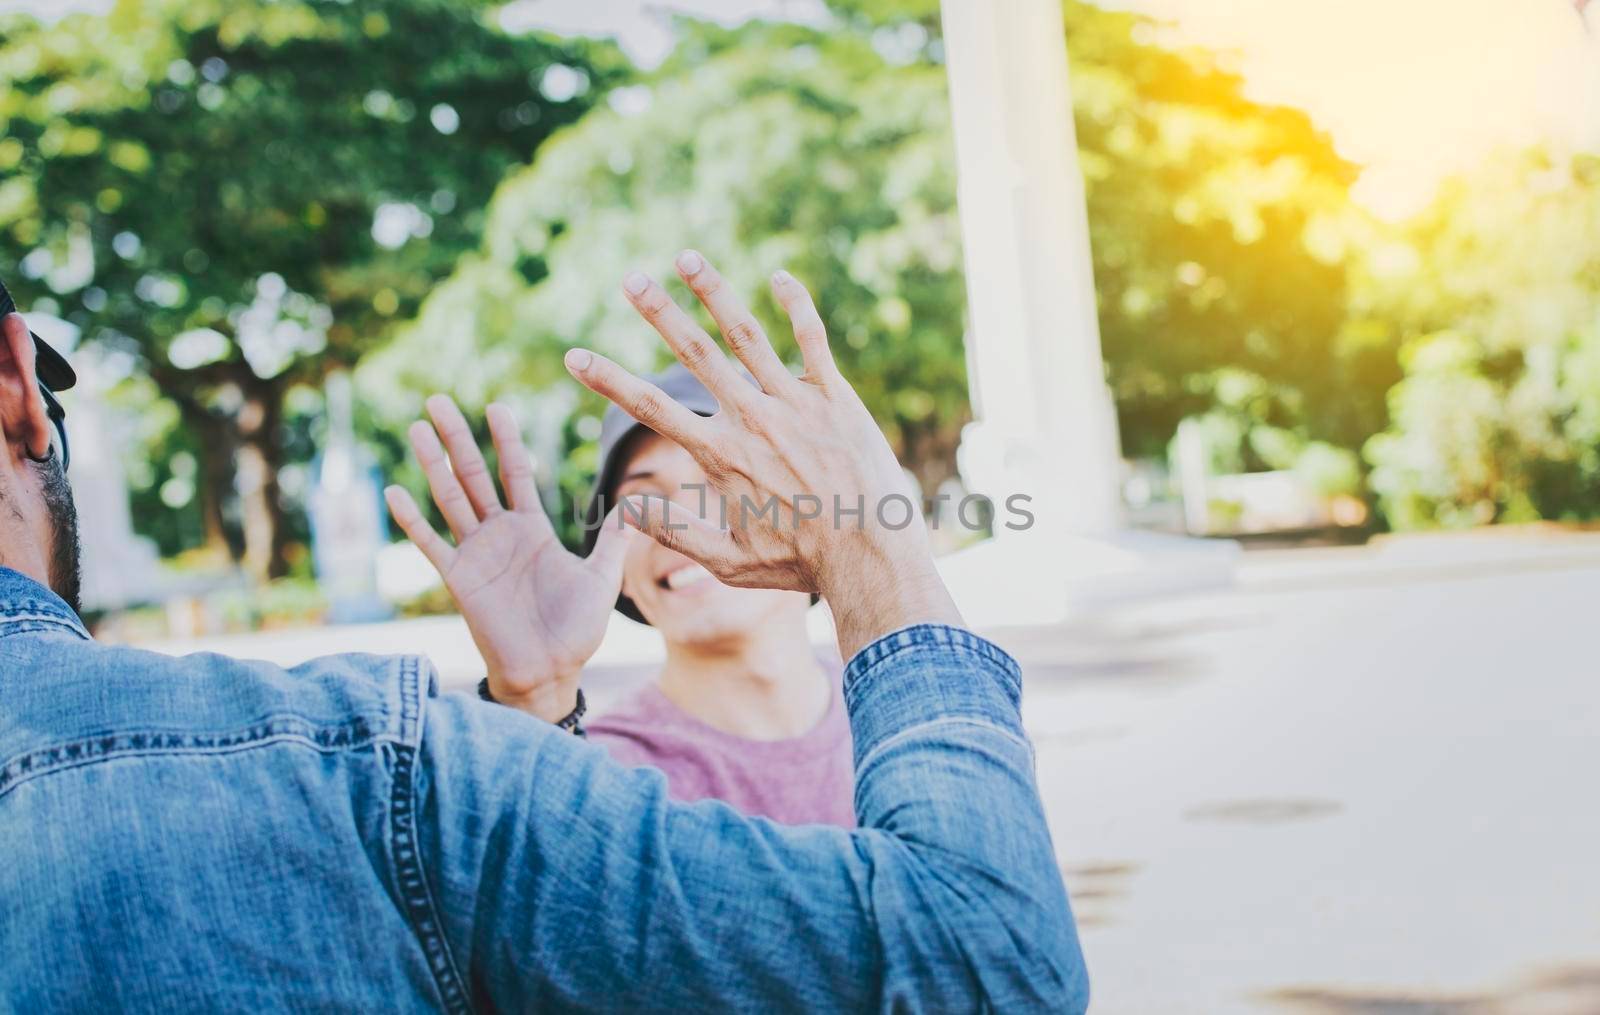 Close up of smiling people shaking hands in a park. Concept of two friends greeting each other with a handshake on the street, Back view of two smiling friends shaking hands on the street